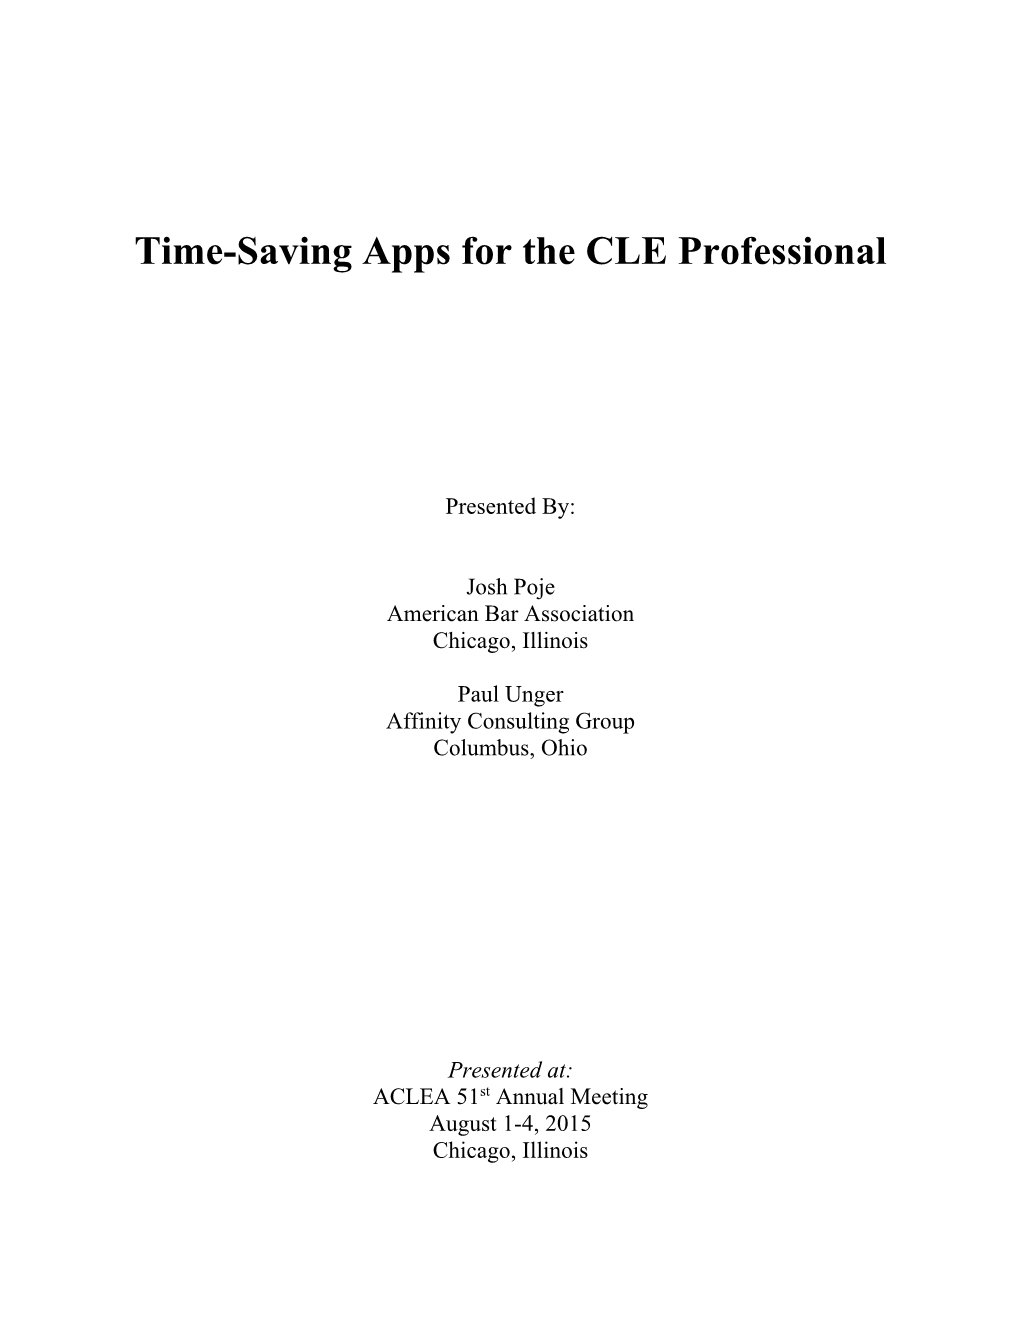 Time-Saving Apps for the CLE Professional